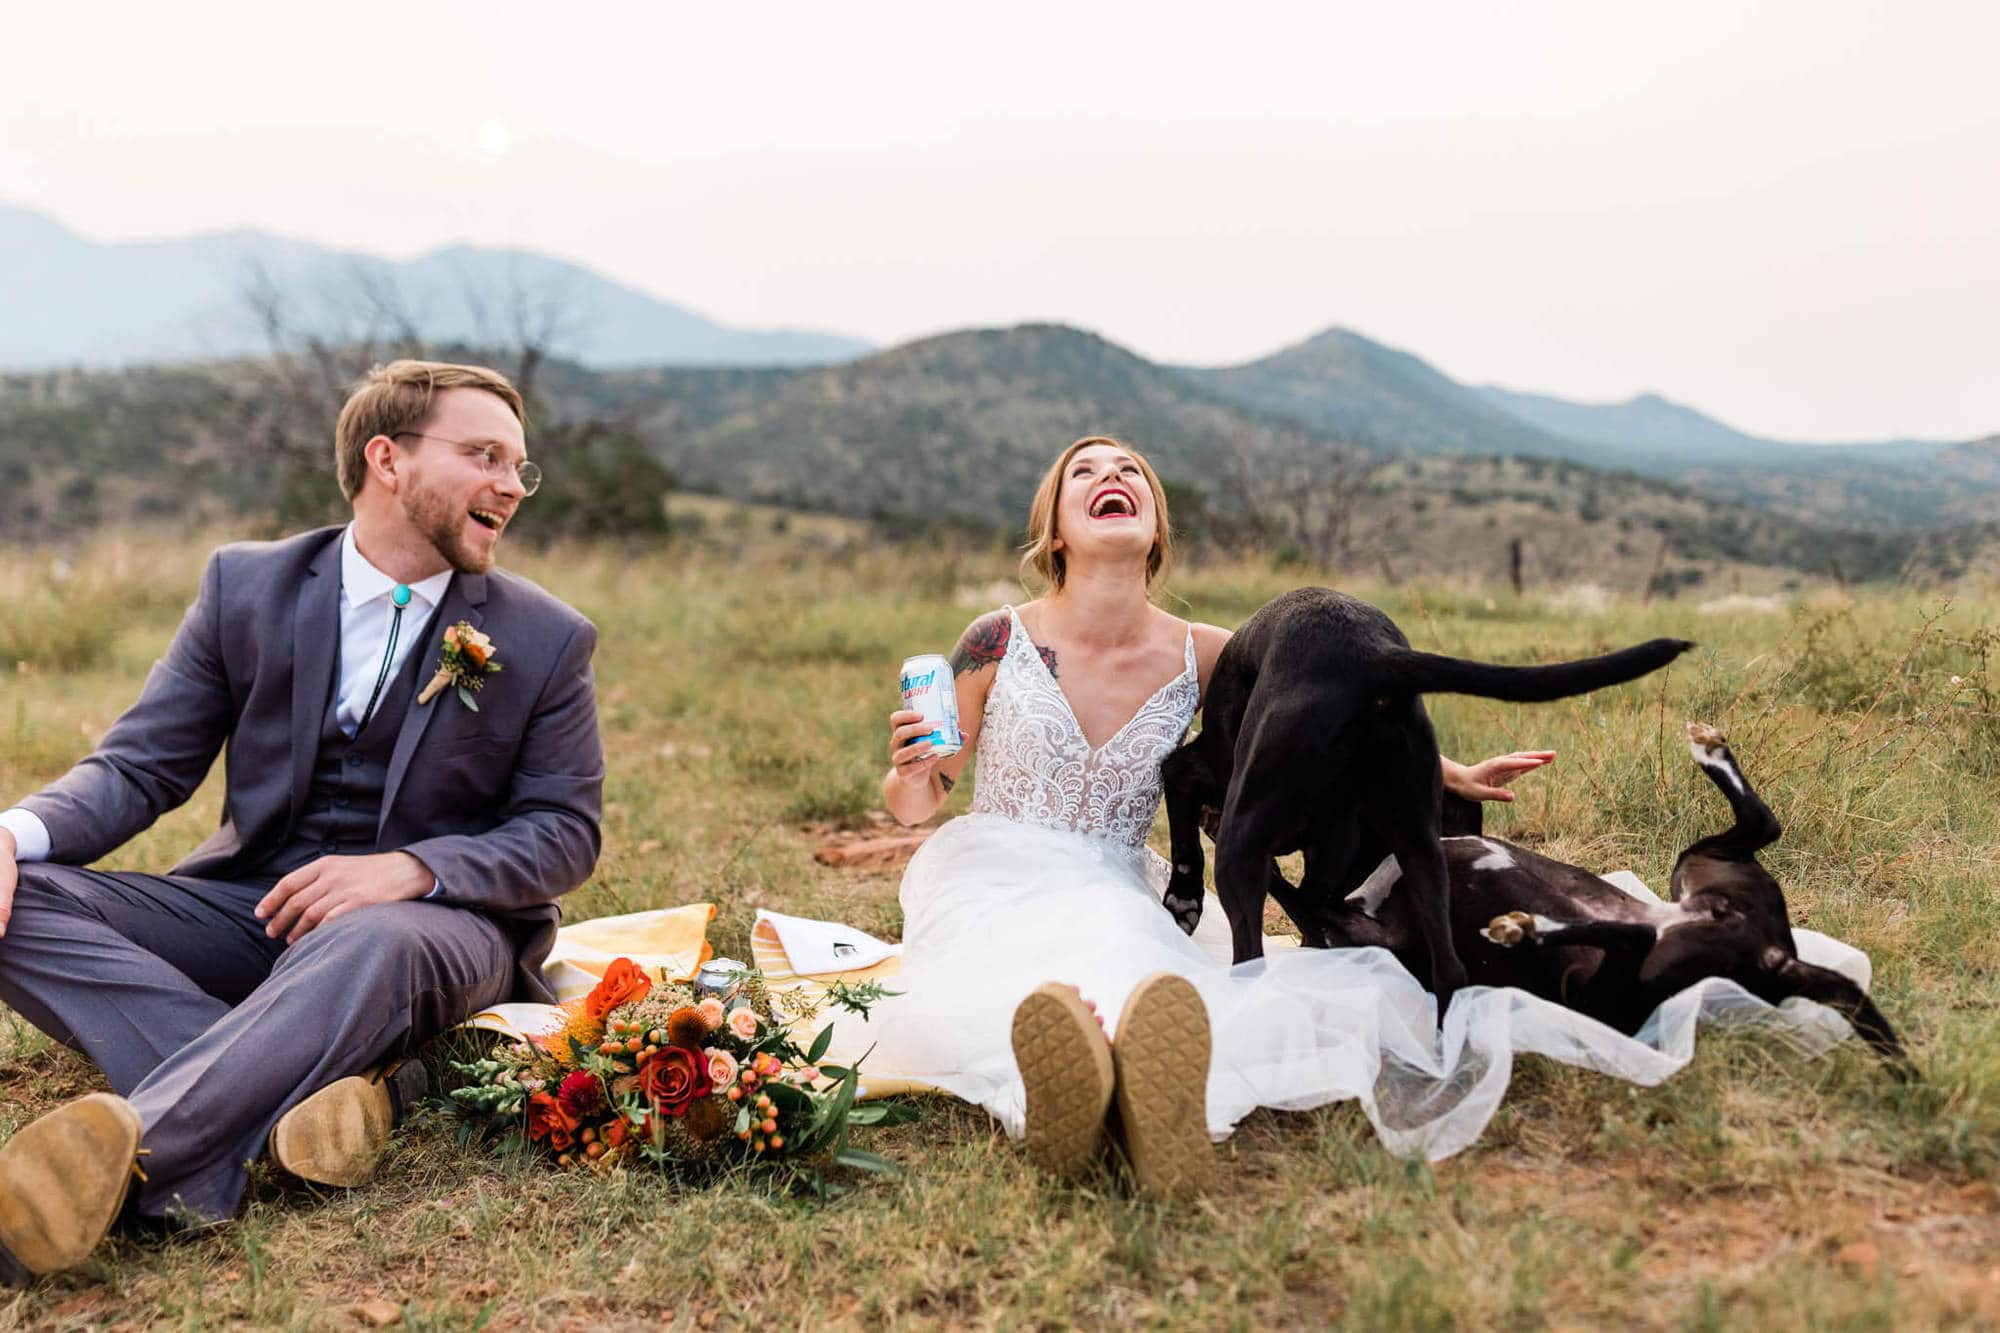 This dog friendly hiking elopement in Southern Arizona uses the Arizona Trail as a perfect back drop for this chill and emotional elopement.